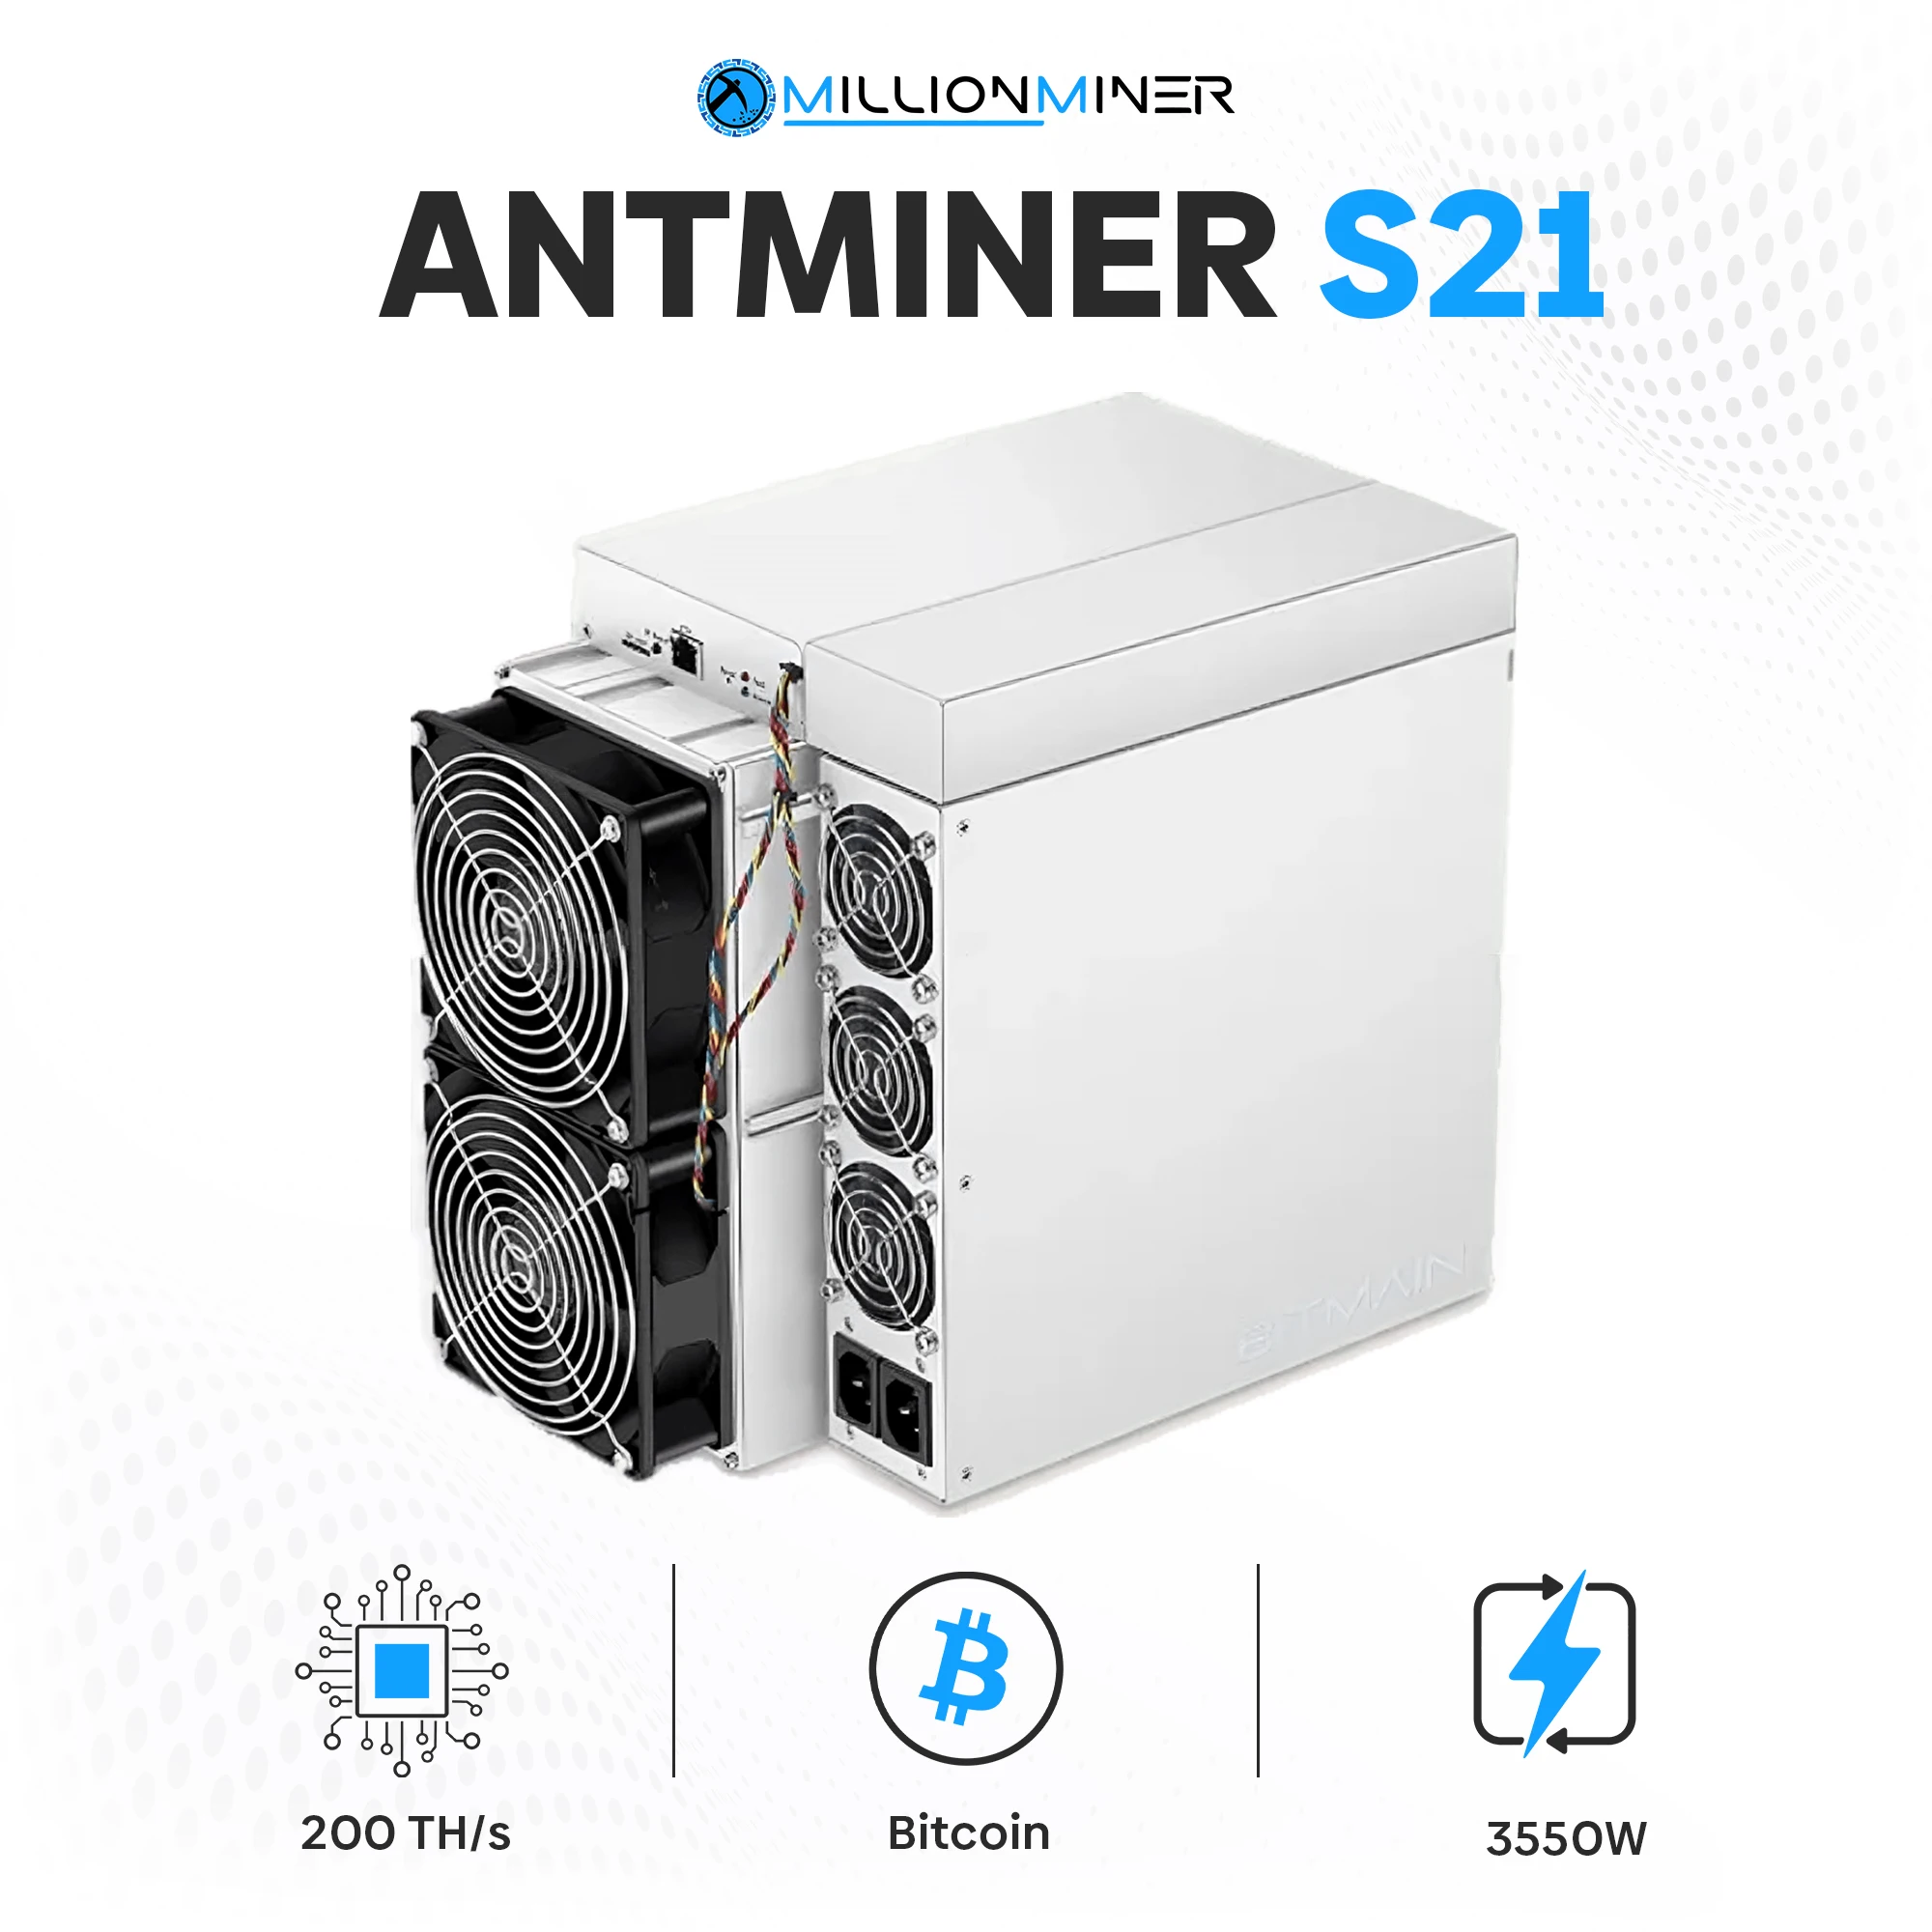 

CR Buy 4 get 2 free Bitmain Antminer S21 (200TH/s)